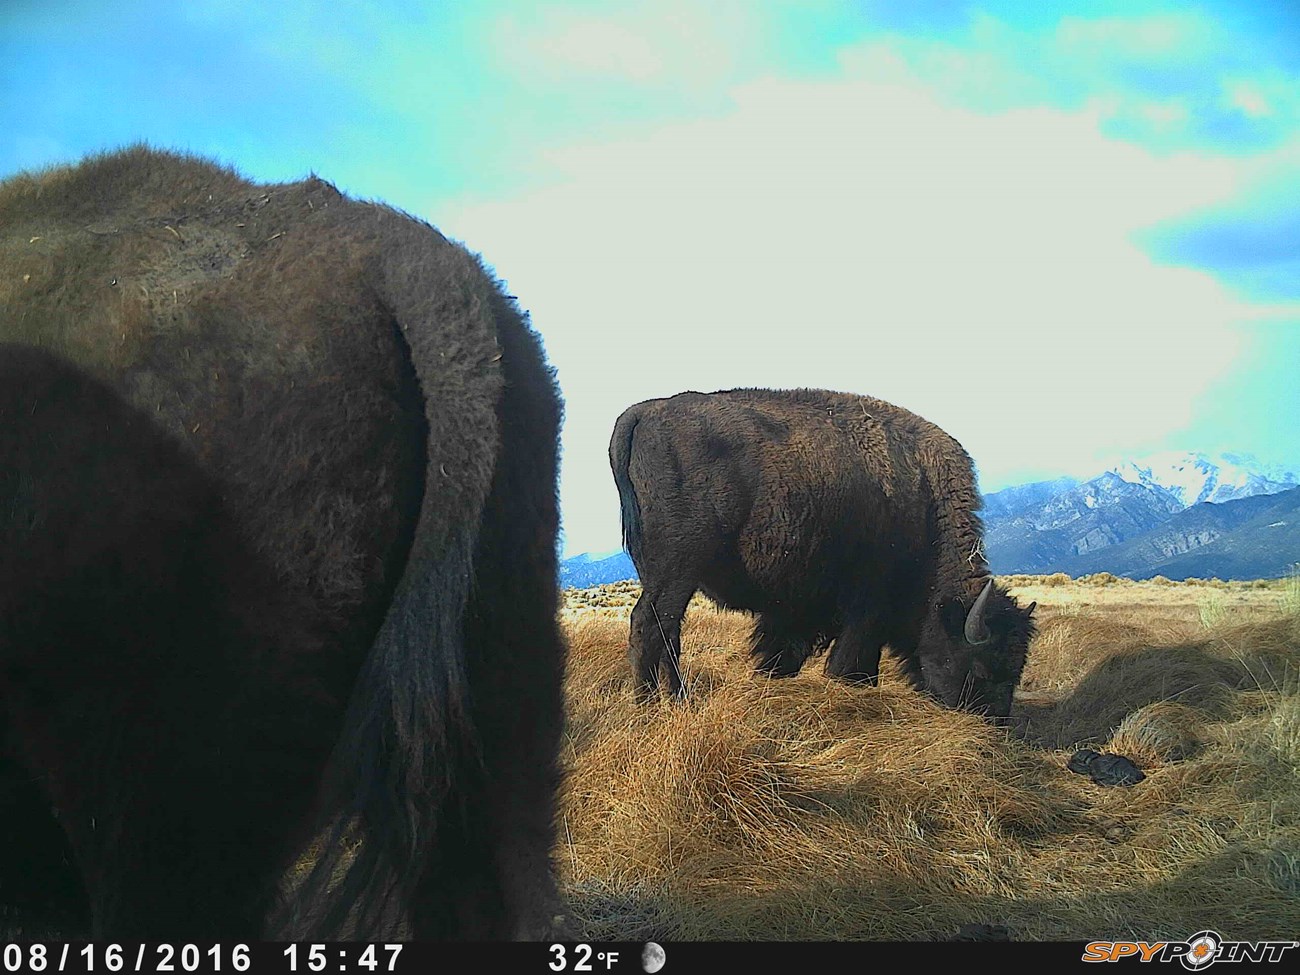 a wildlife camera capture of the hind quarters of one bison in the foreground and another bison in the background